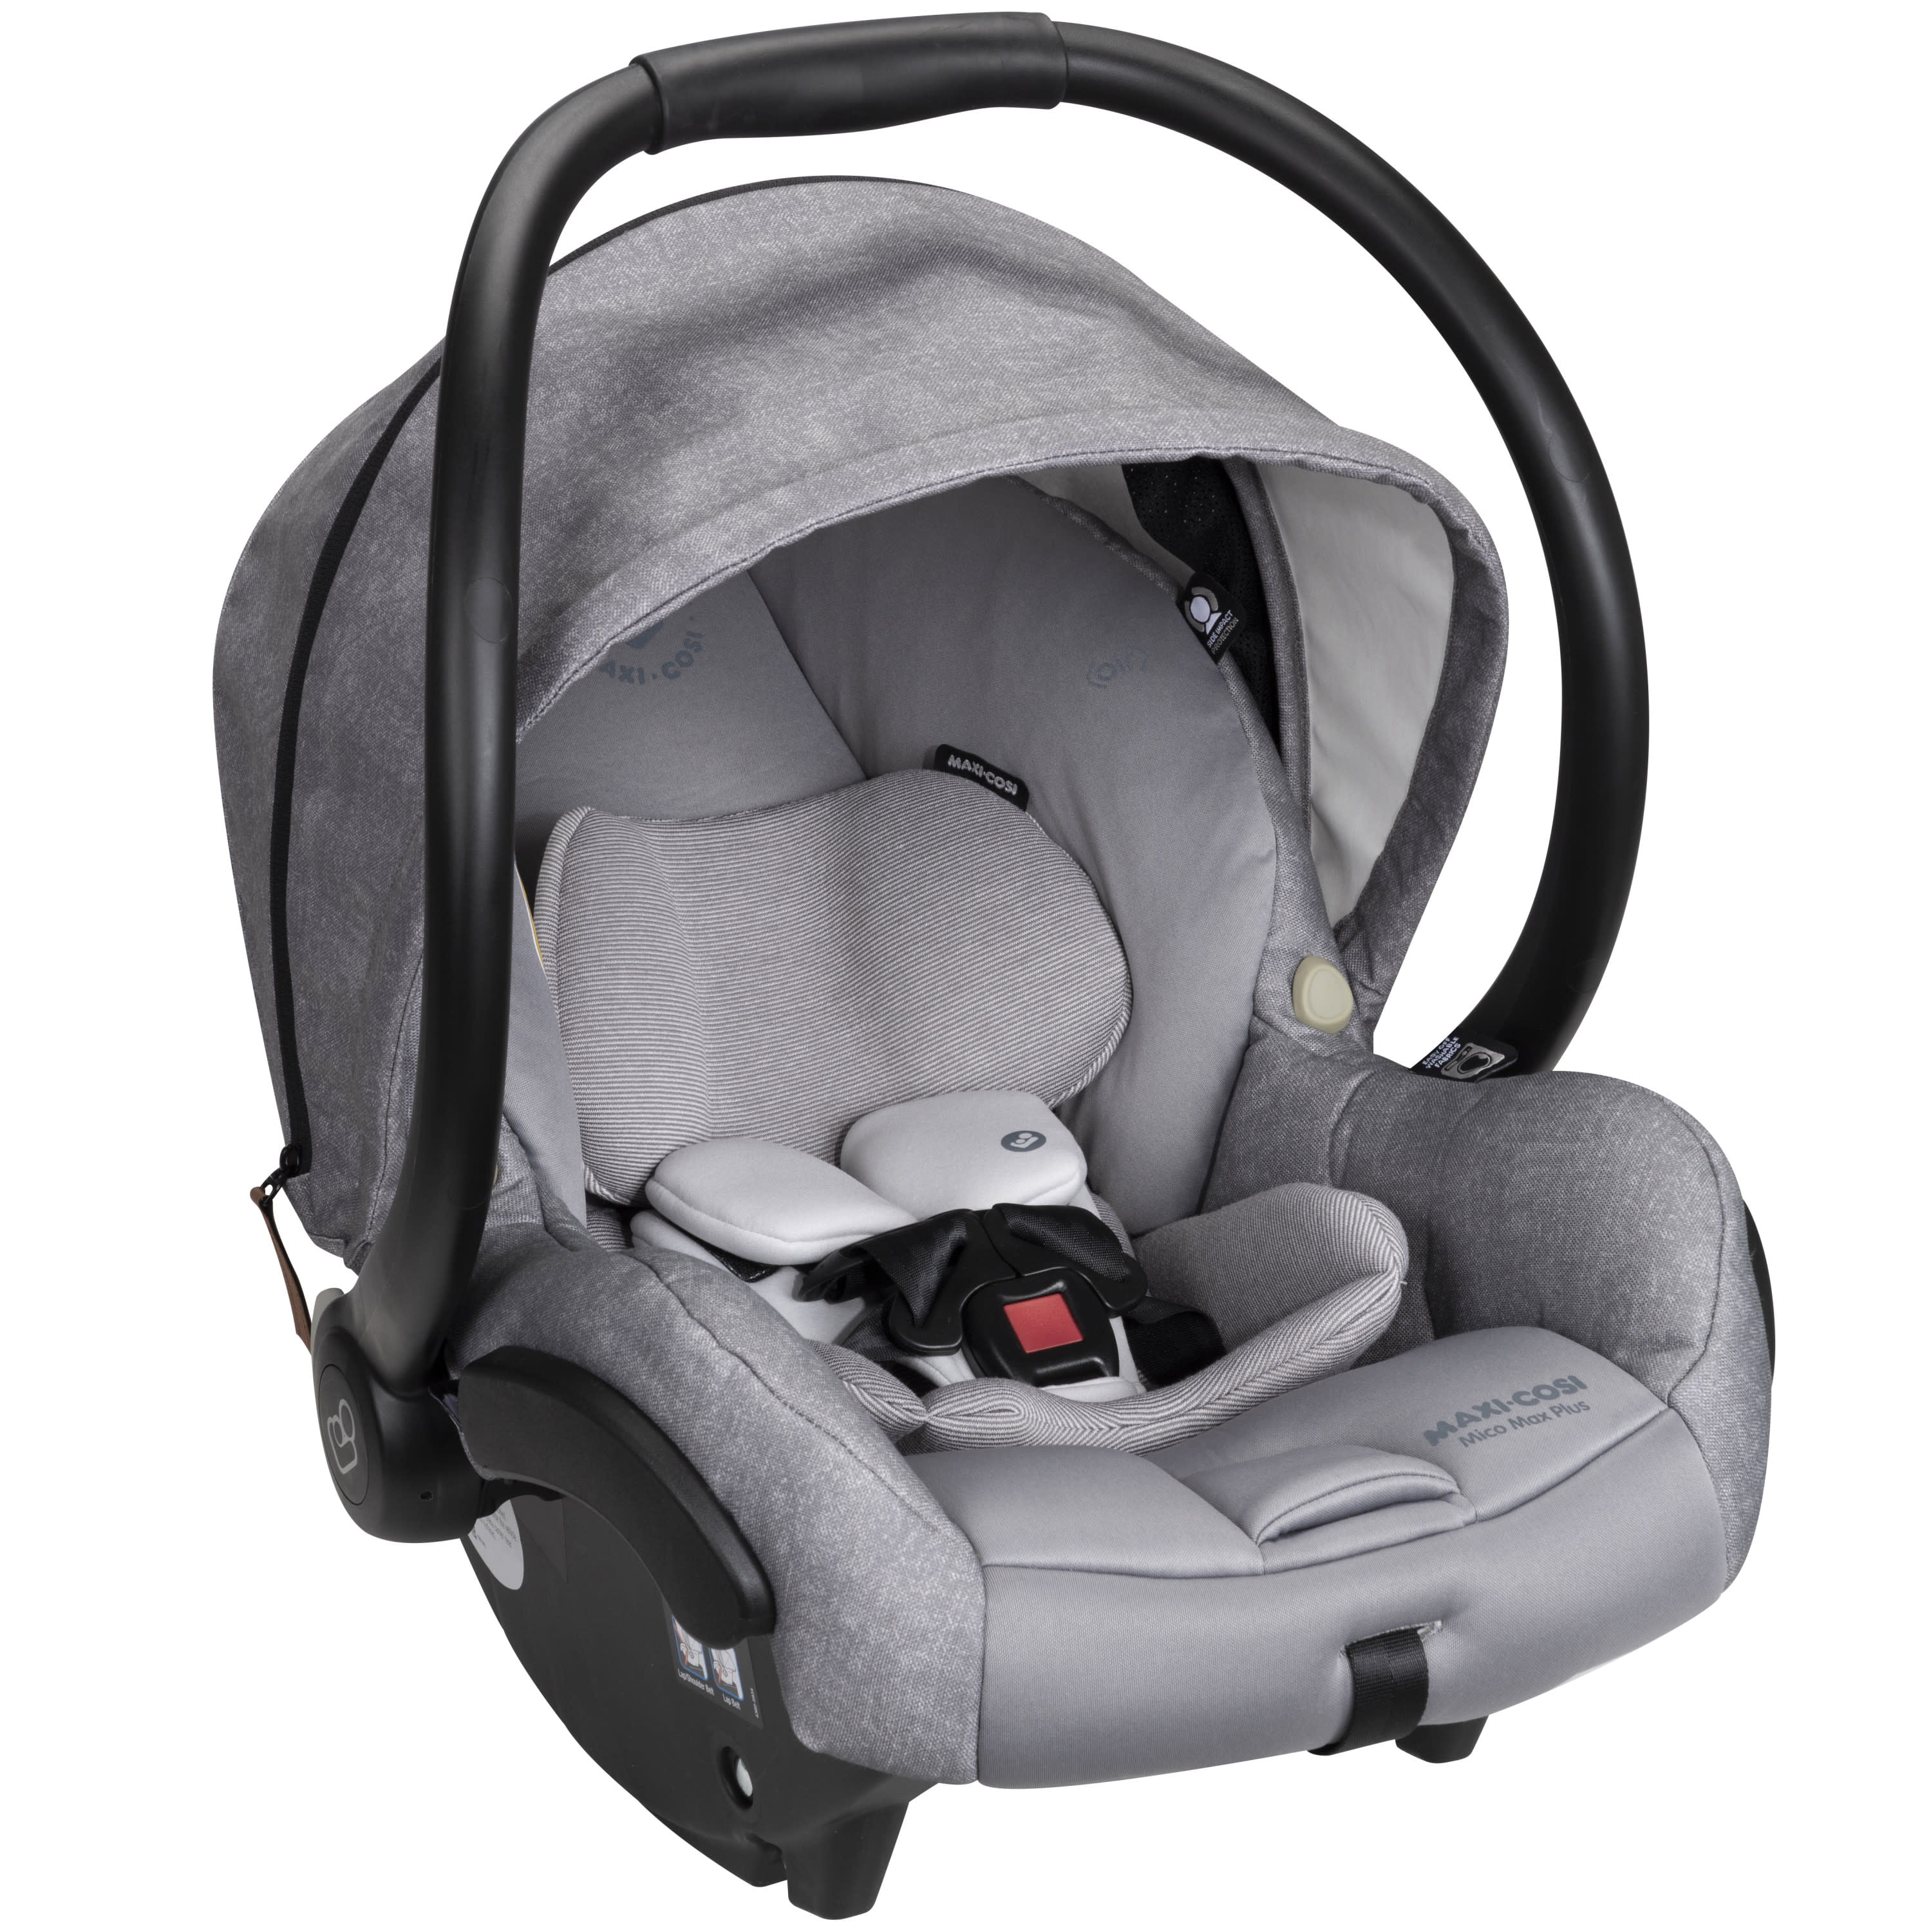 Order the Maxi-Cosi Nomad i-Size Car Seat online - Baby Plus